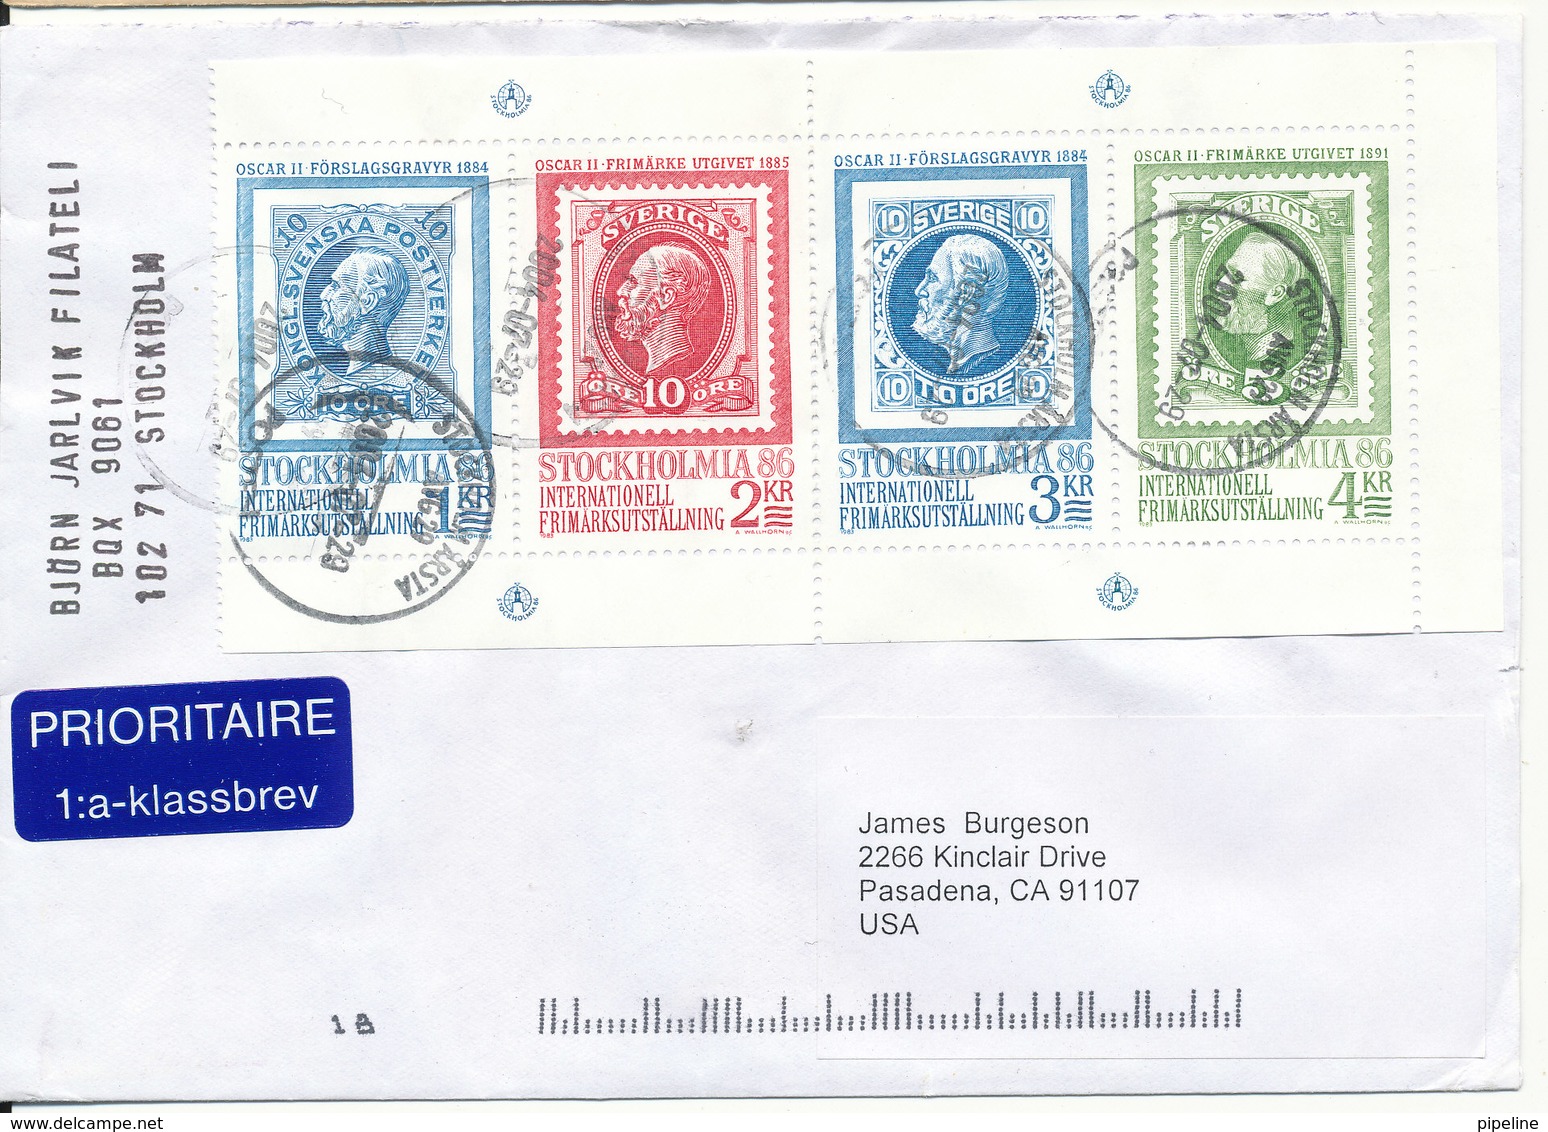 Sweden Cover Sent To USA 29-7-2004 Franked With Stockholmia 86 Minisheet - Covers & Documents